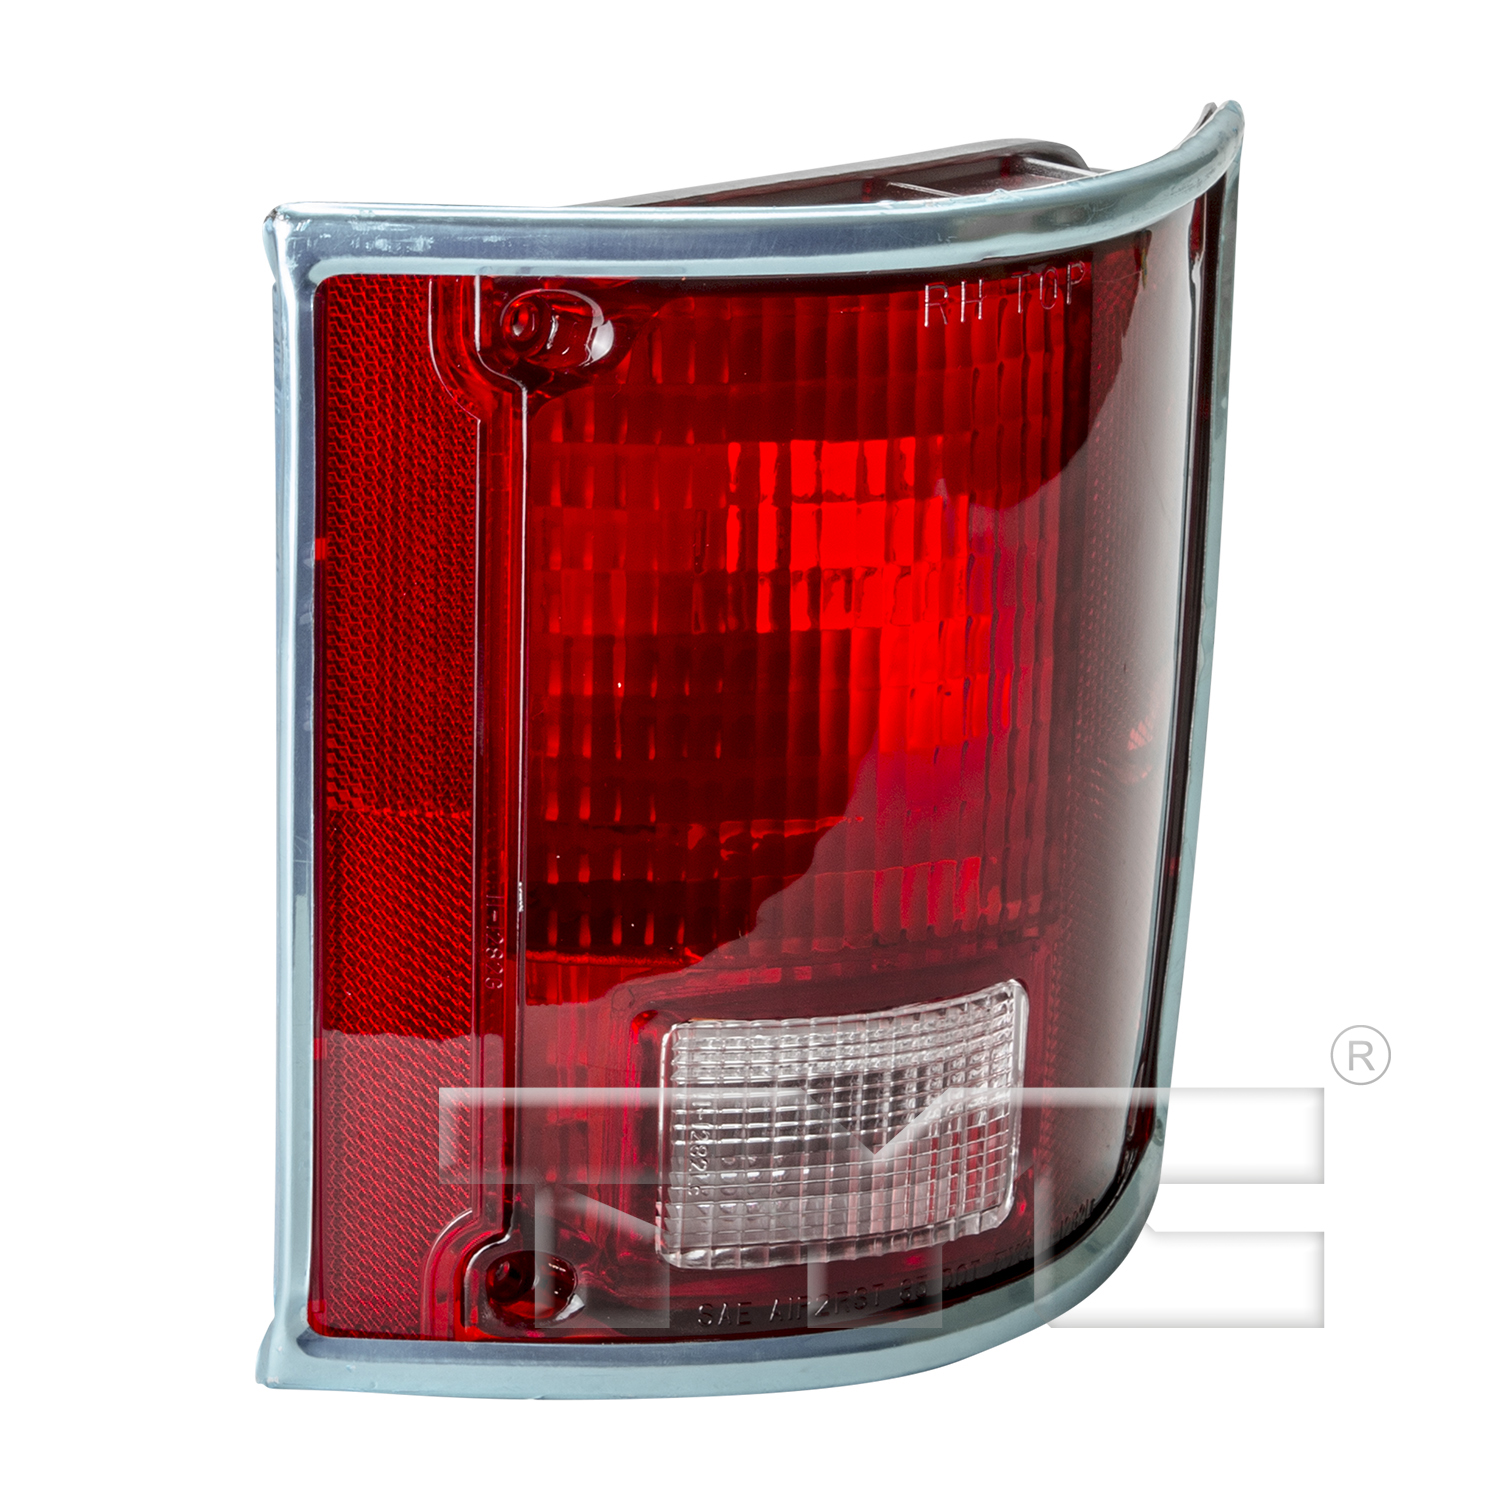 Aftermarket TAILLIGHTS for GMC - K25, K25,78-78,RT Taillamp assy